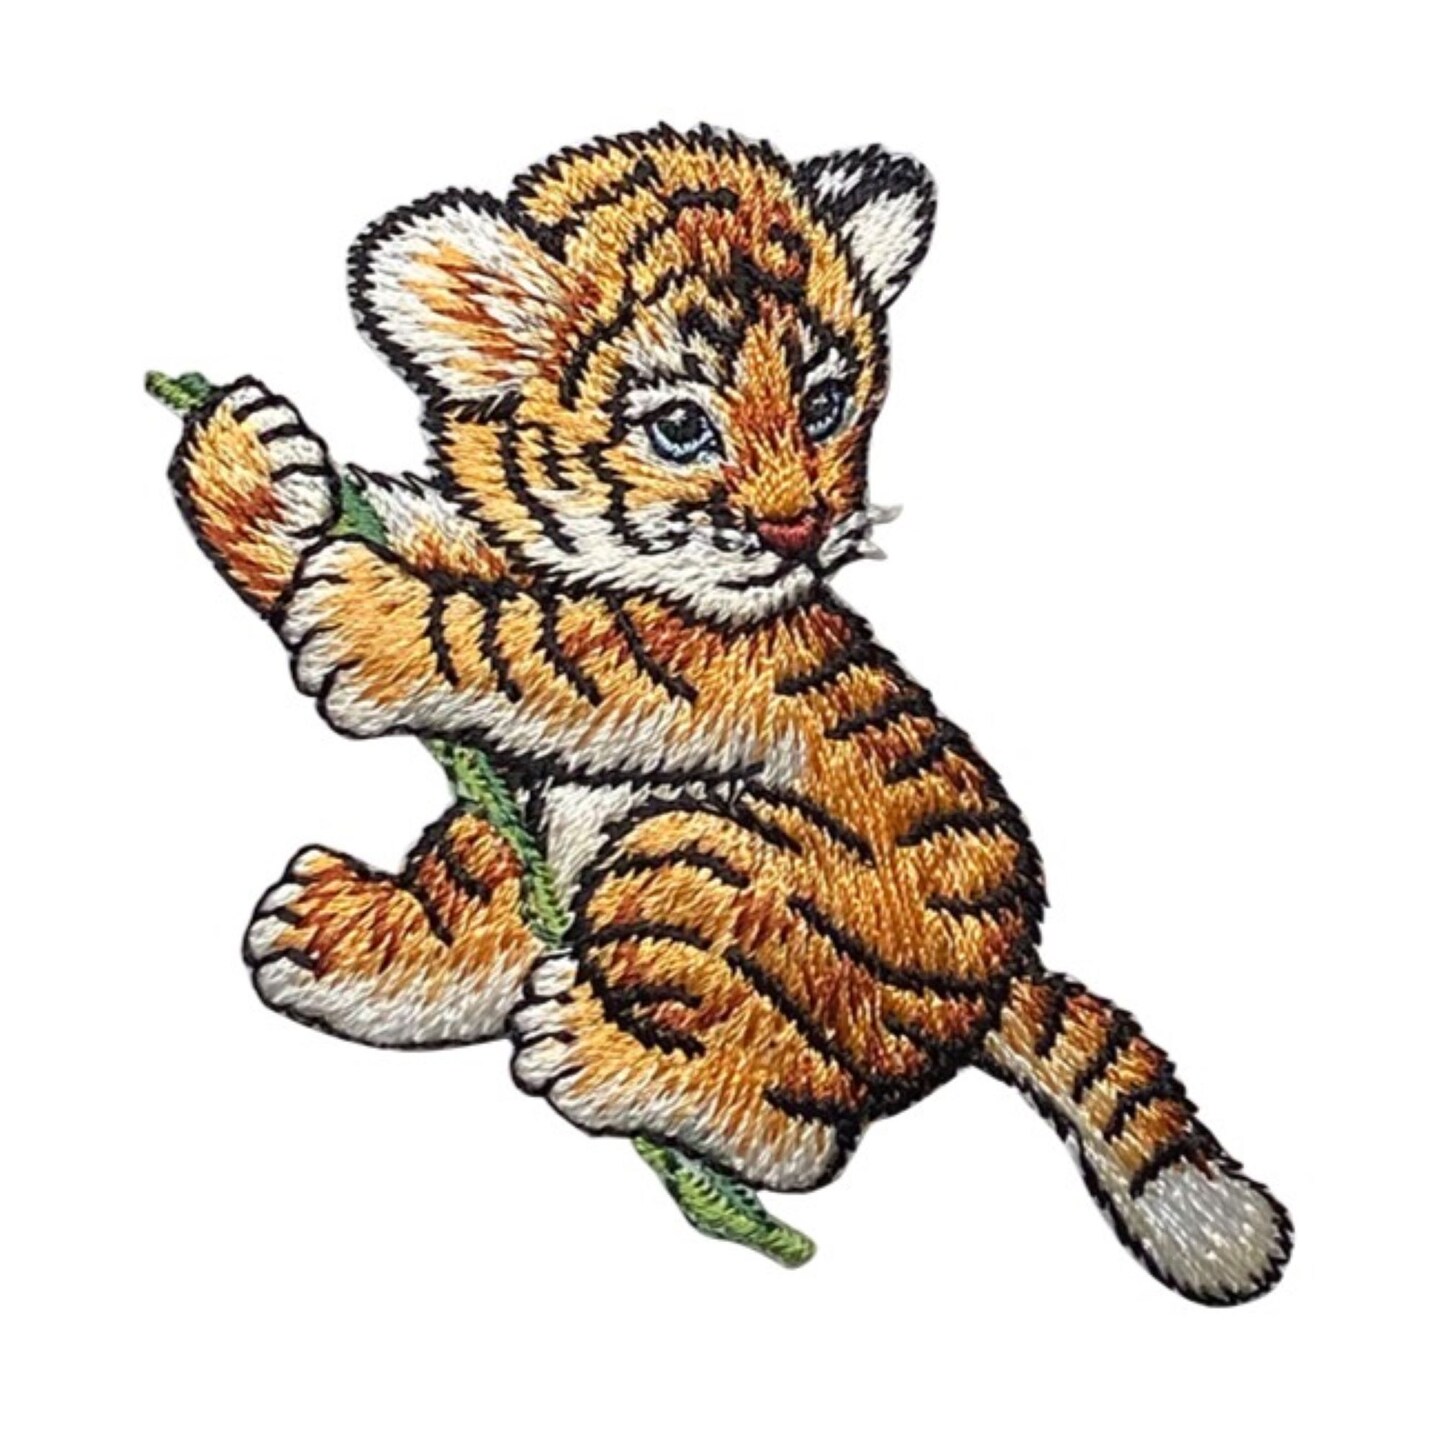 Tiger Cub on Vine, Embroidered, Iron on Patch